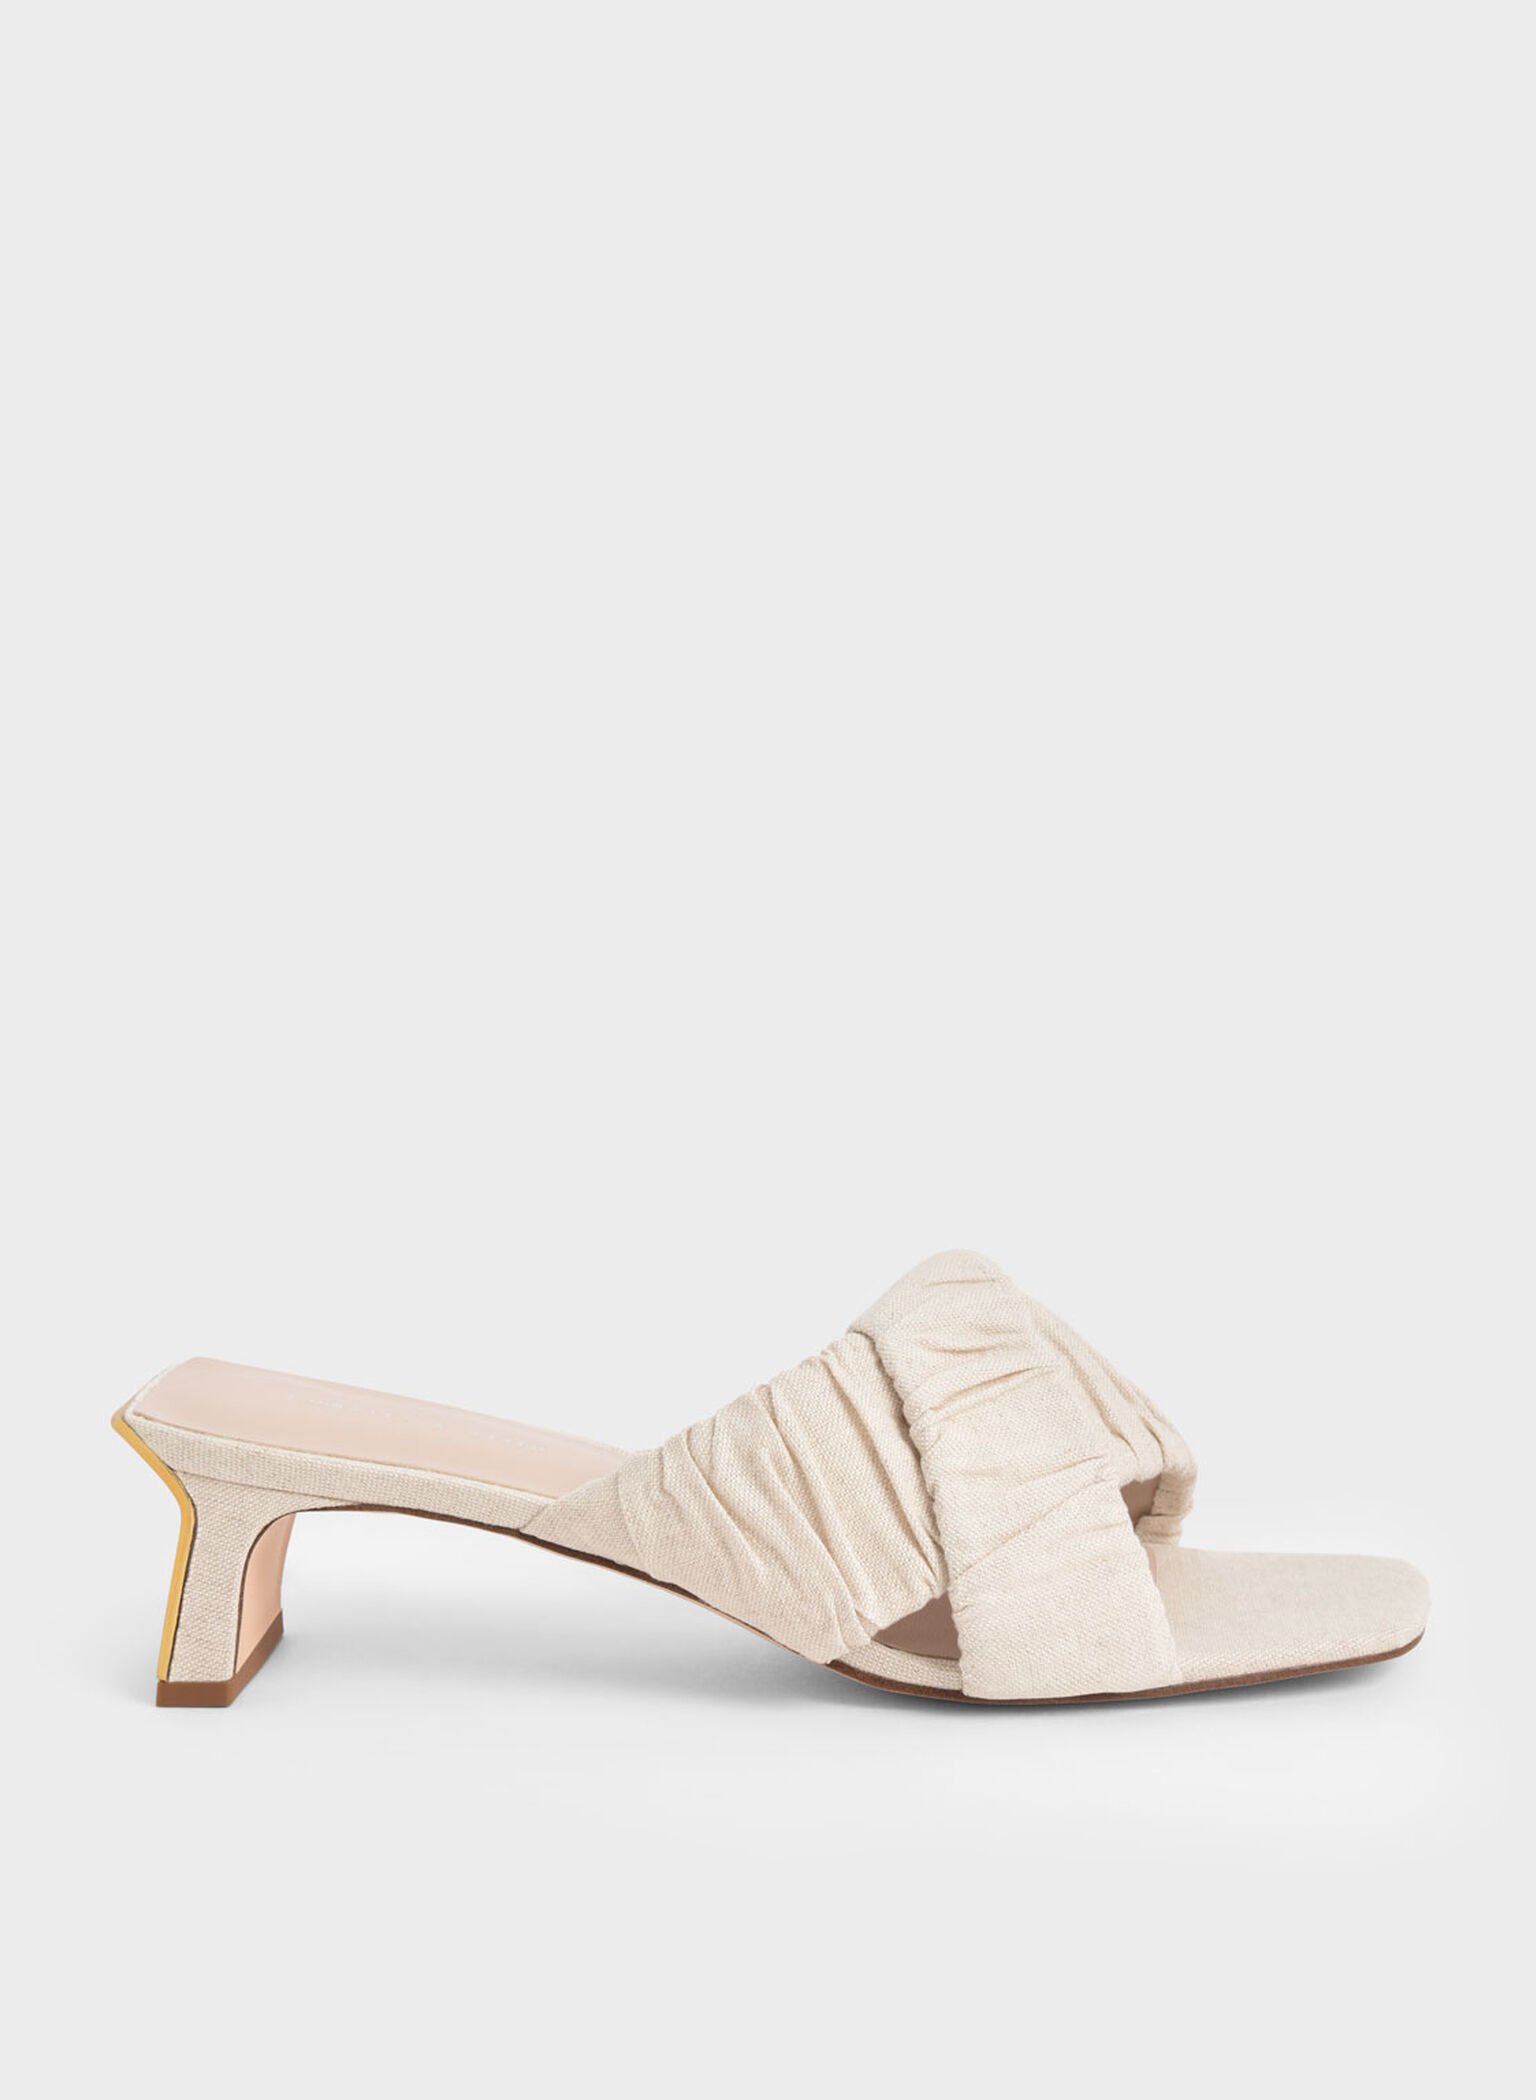 Chalk Linen Asymmetric Ruched Mules - CHARLES & KEITH PH